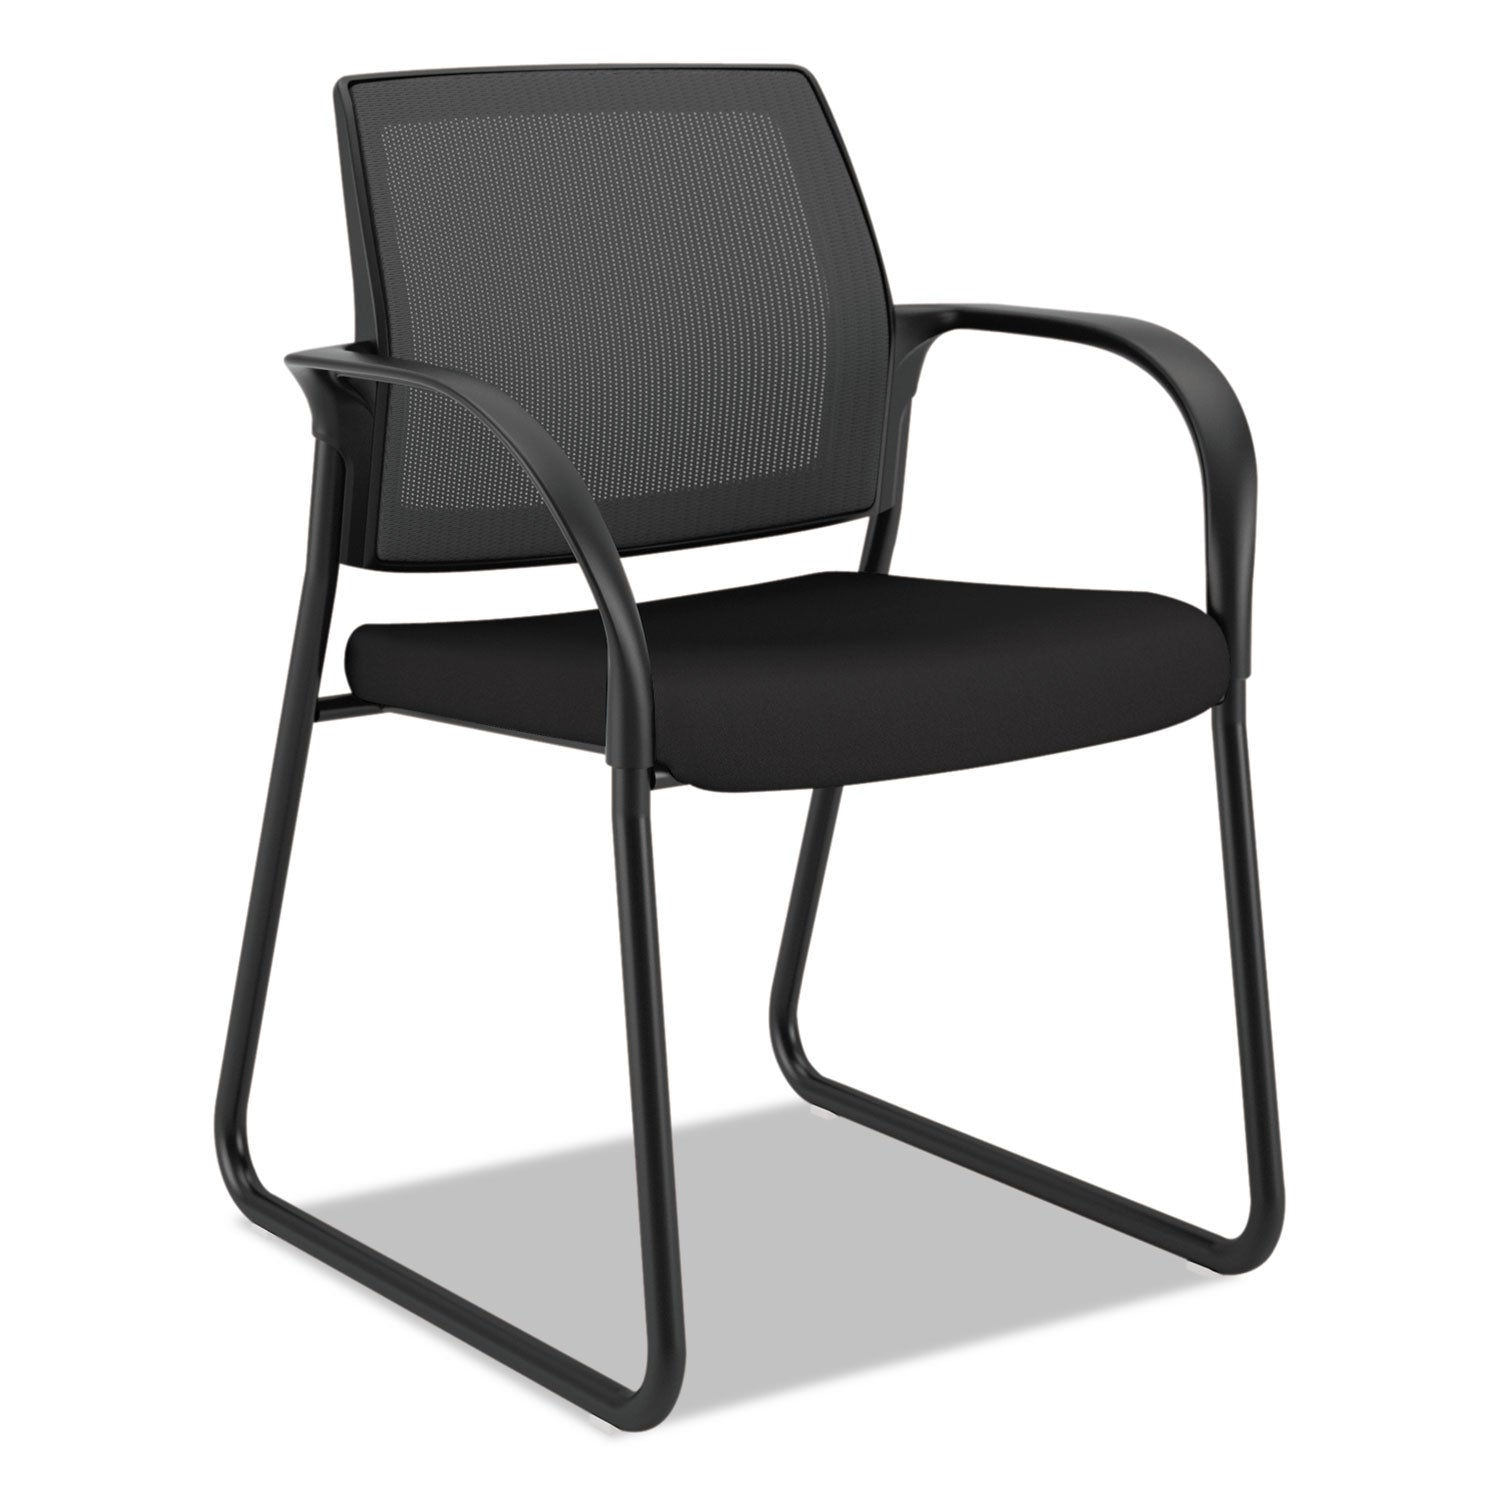 ignition-series-mesh-back-guest-chair-with-sled-base-fabric-seat-25-x-22-x-34-black-seat-black-back-black-base_honib108imcu10 - 1